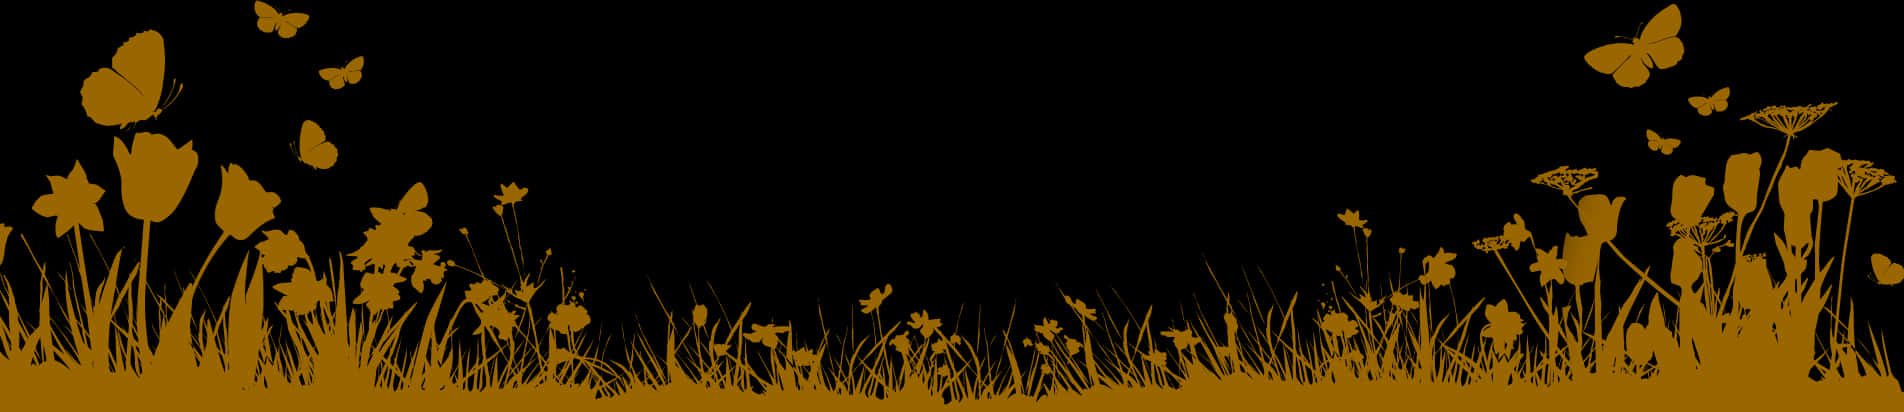 Golden Nature Silhouette Border PNG image